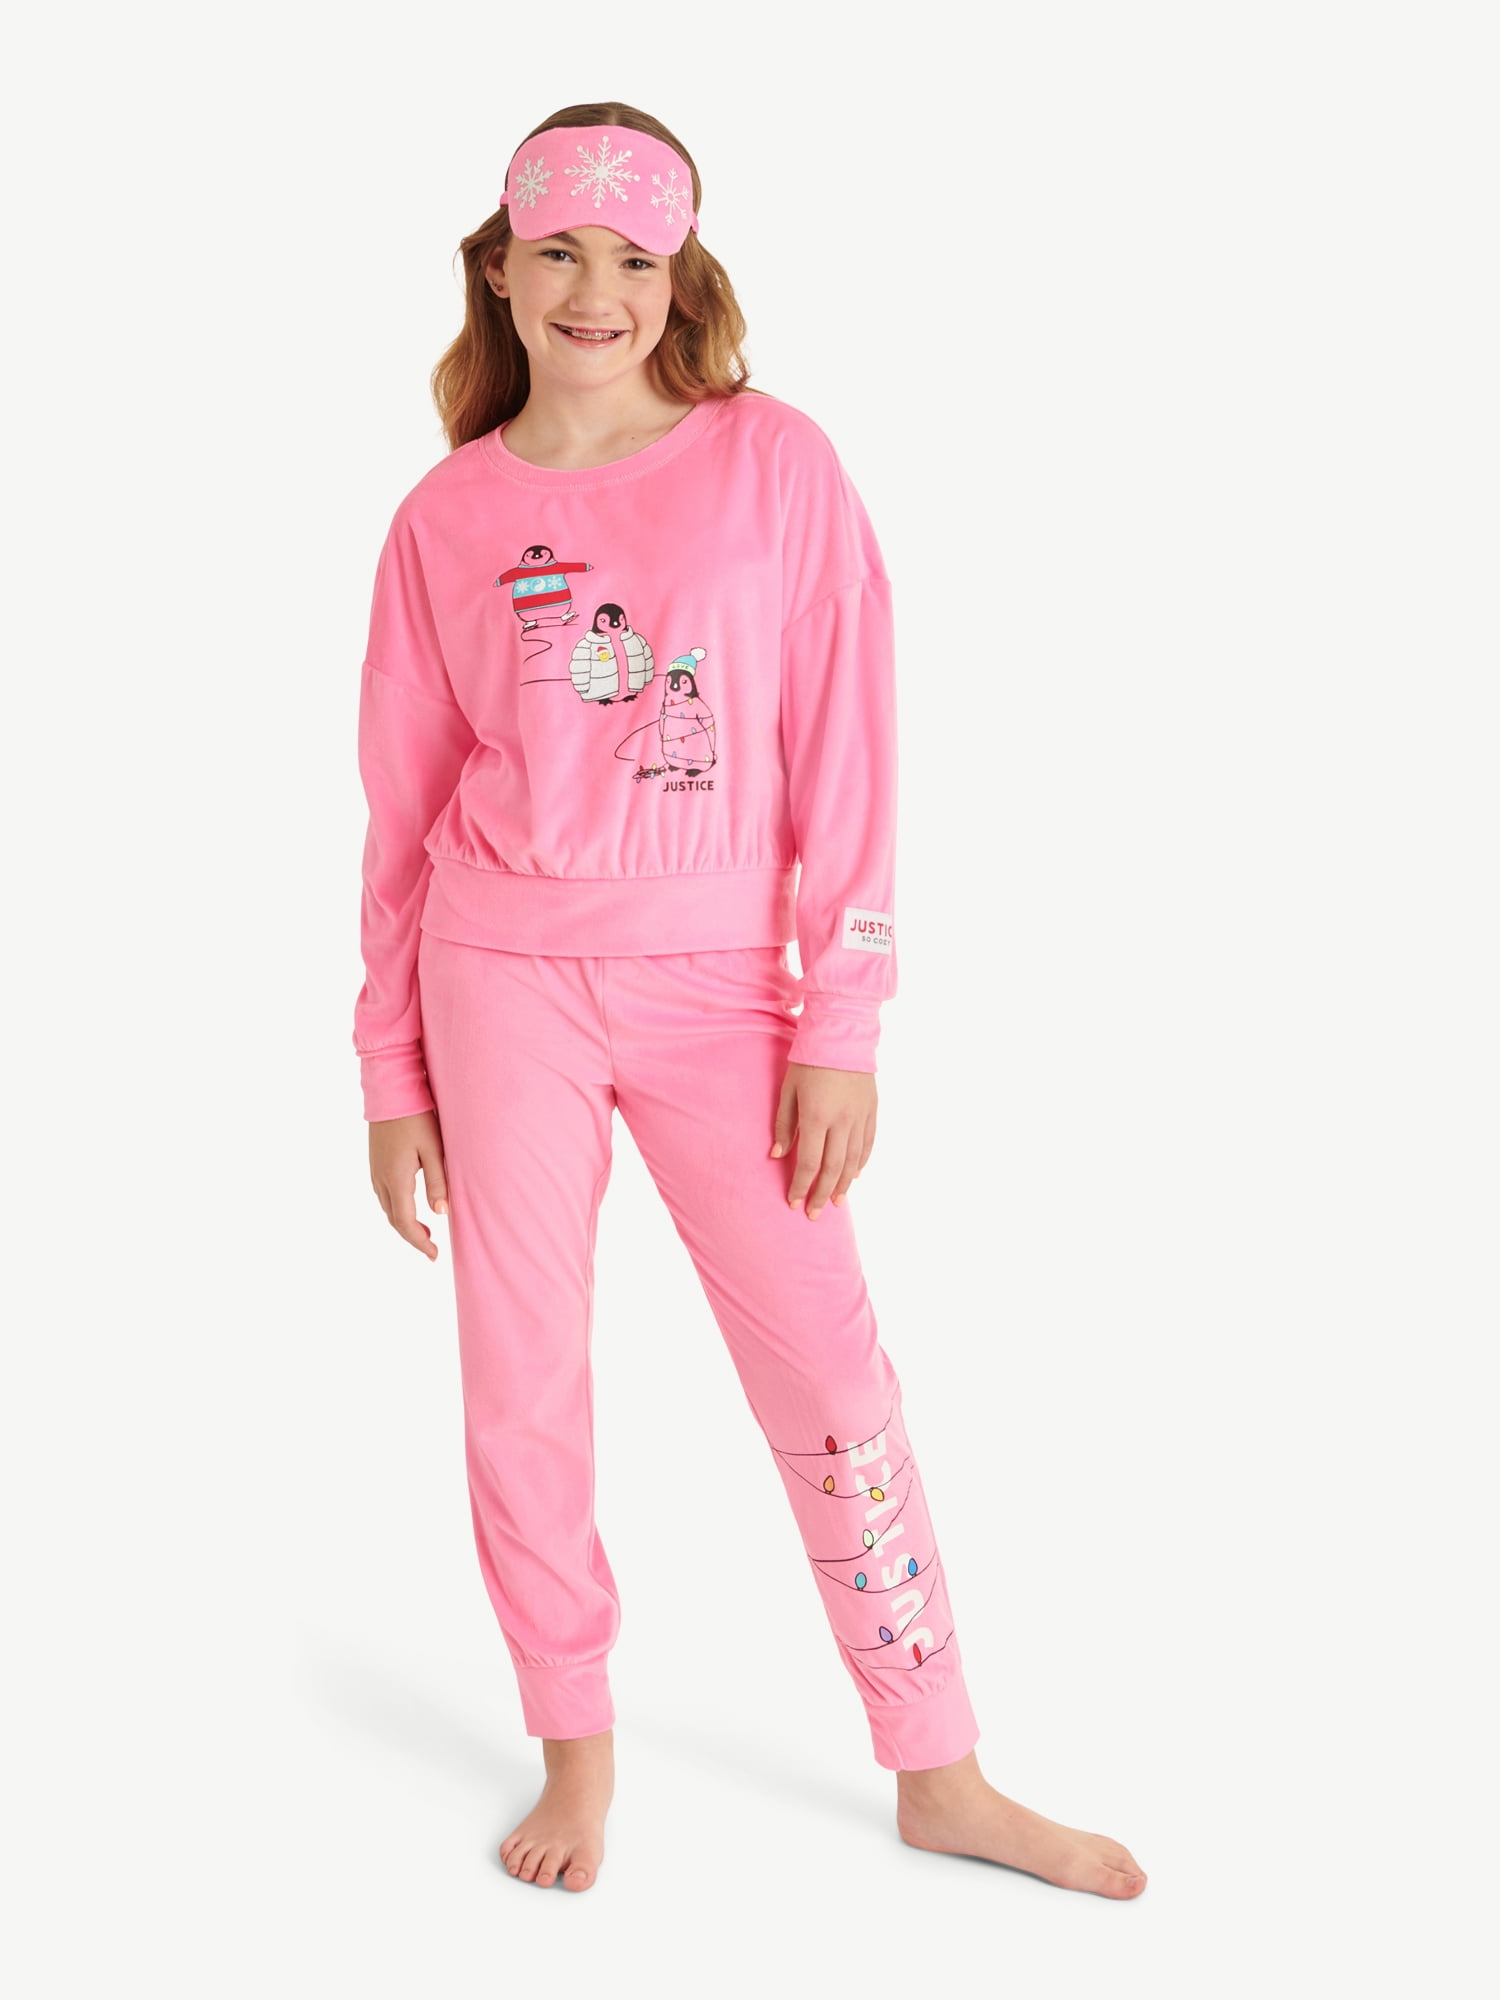 Justice Girls Holiday Long Sleeve Top and Jogger Set with Eyemask, 2-piece Pajama Set, Sizes 5-18